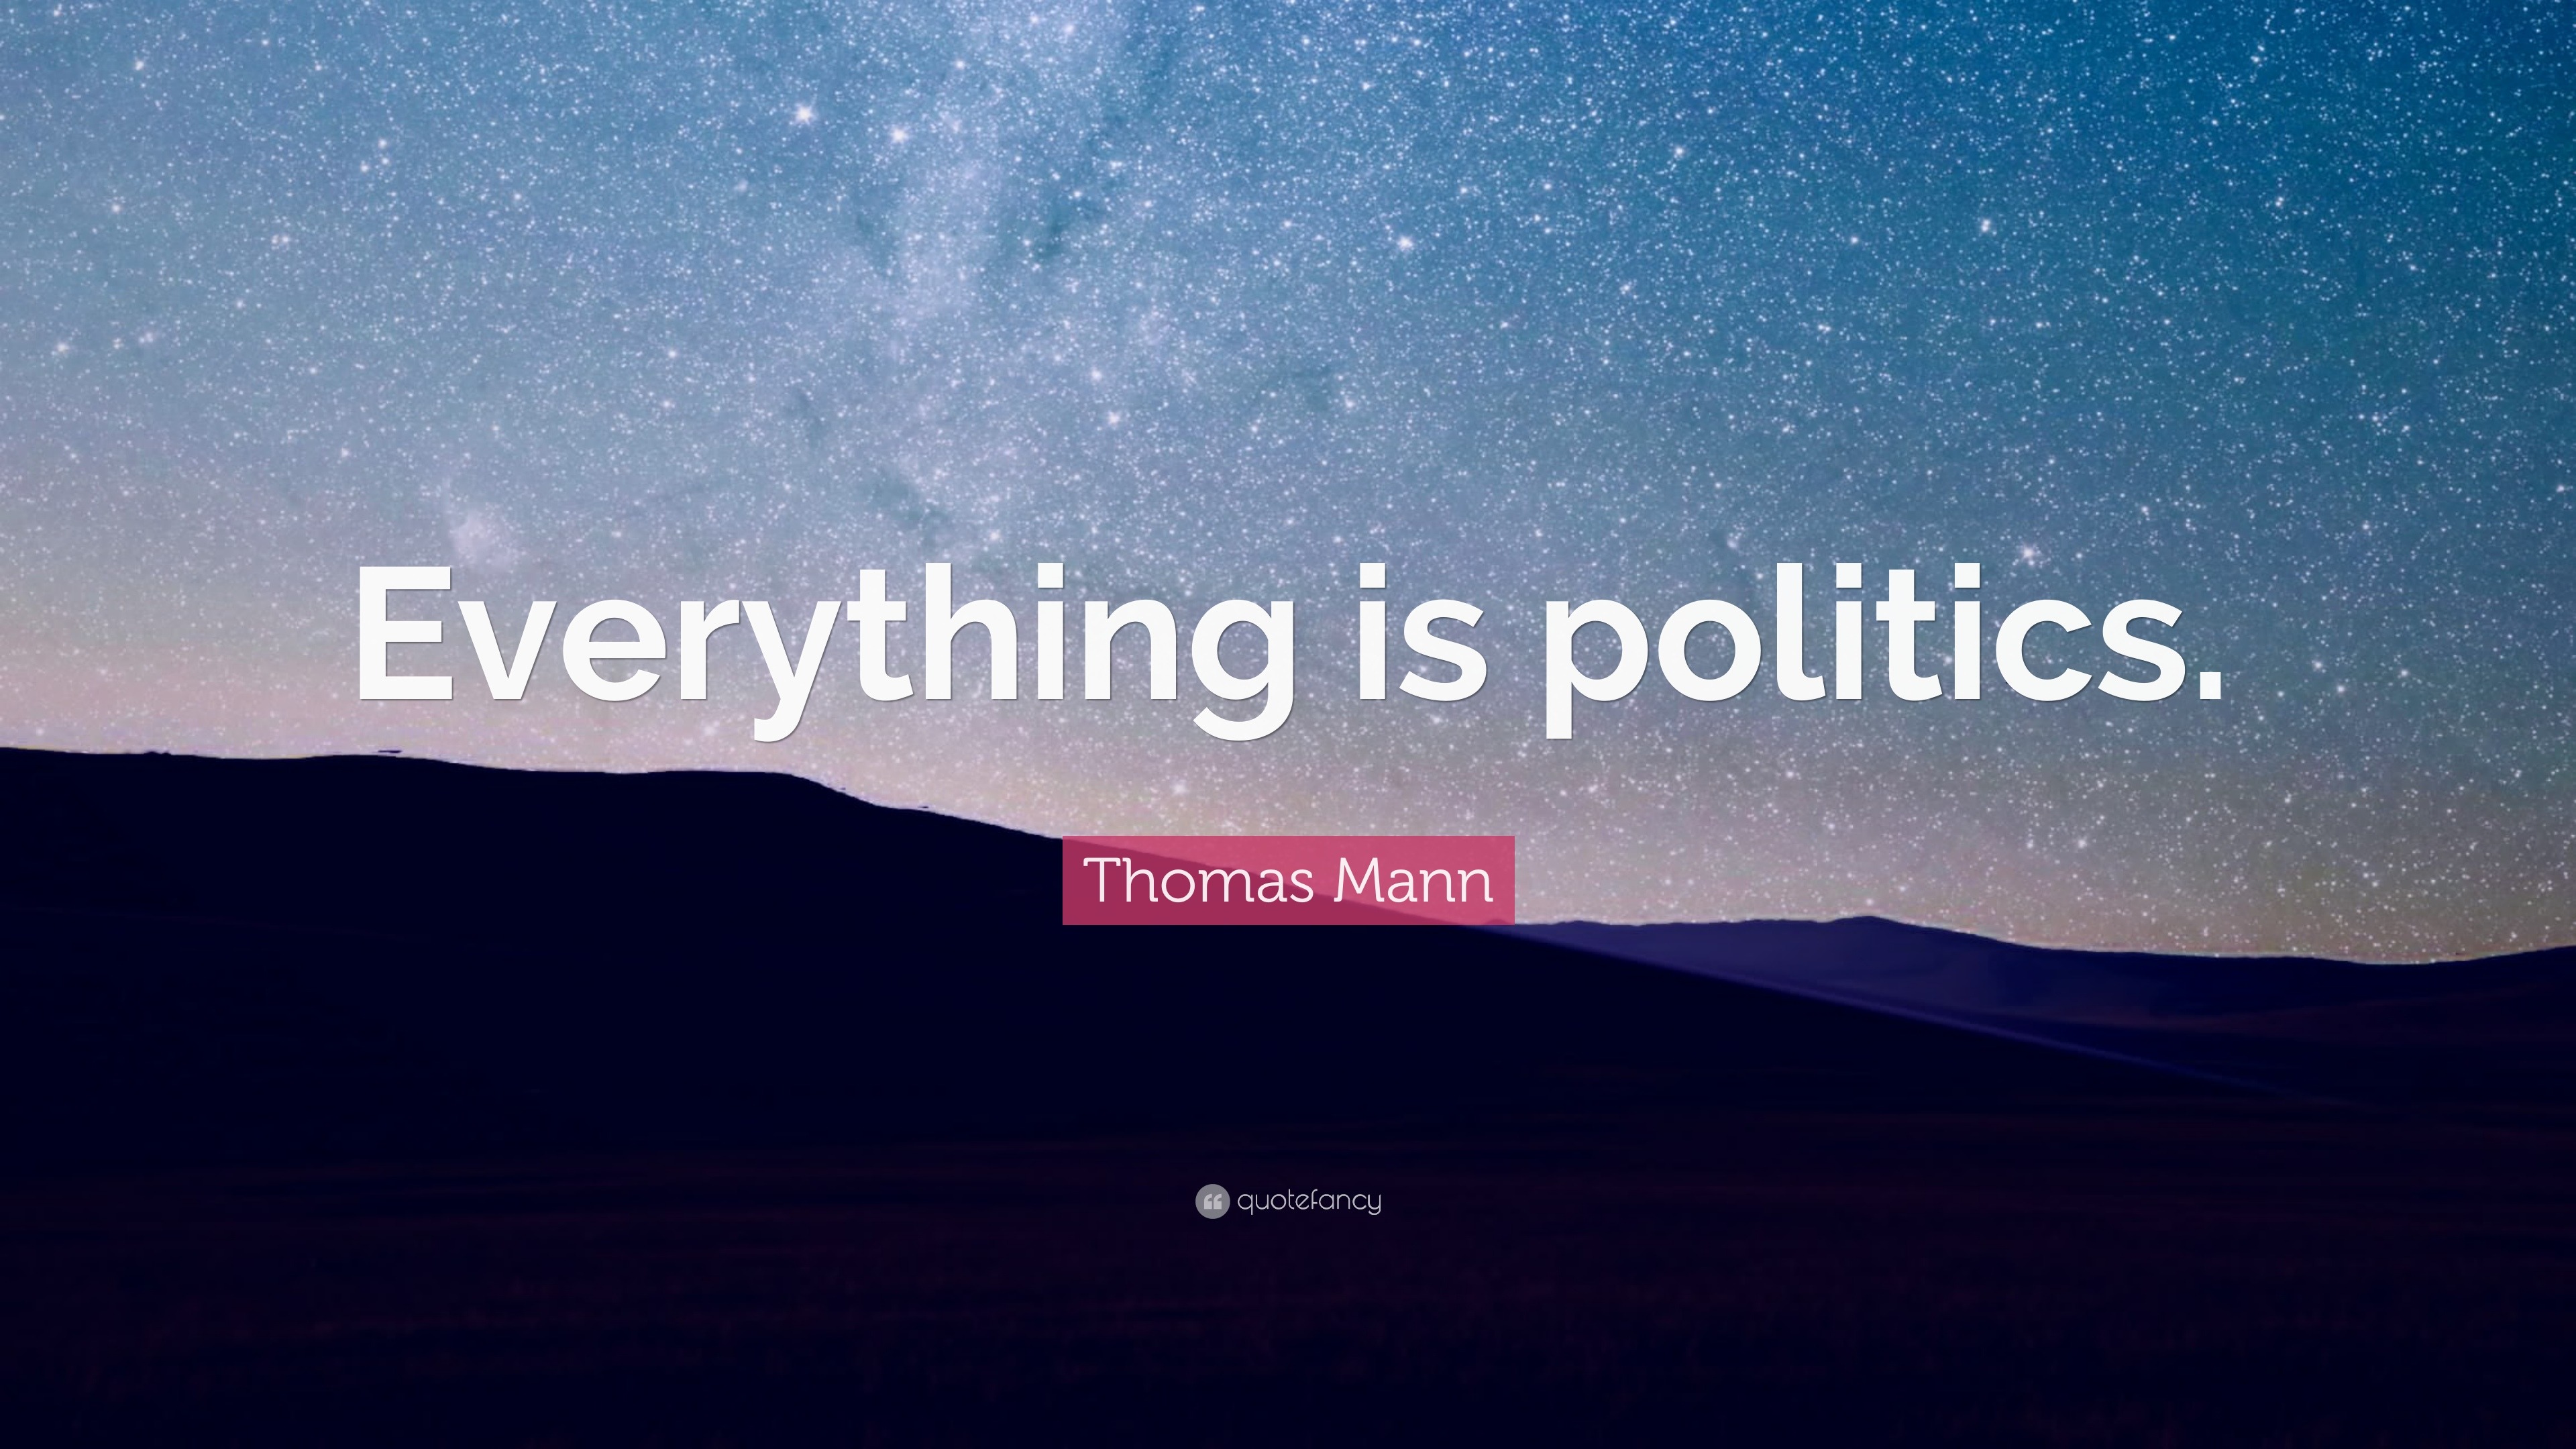 Thomas Mann Quote “everything Is Politics” 9508